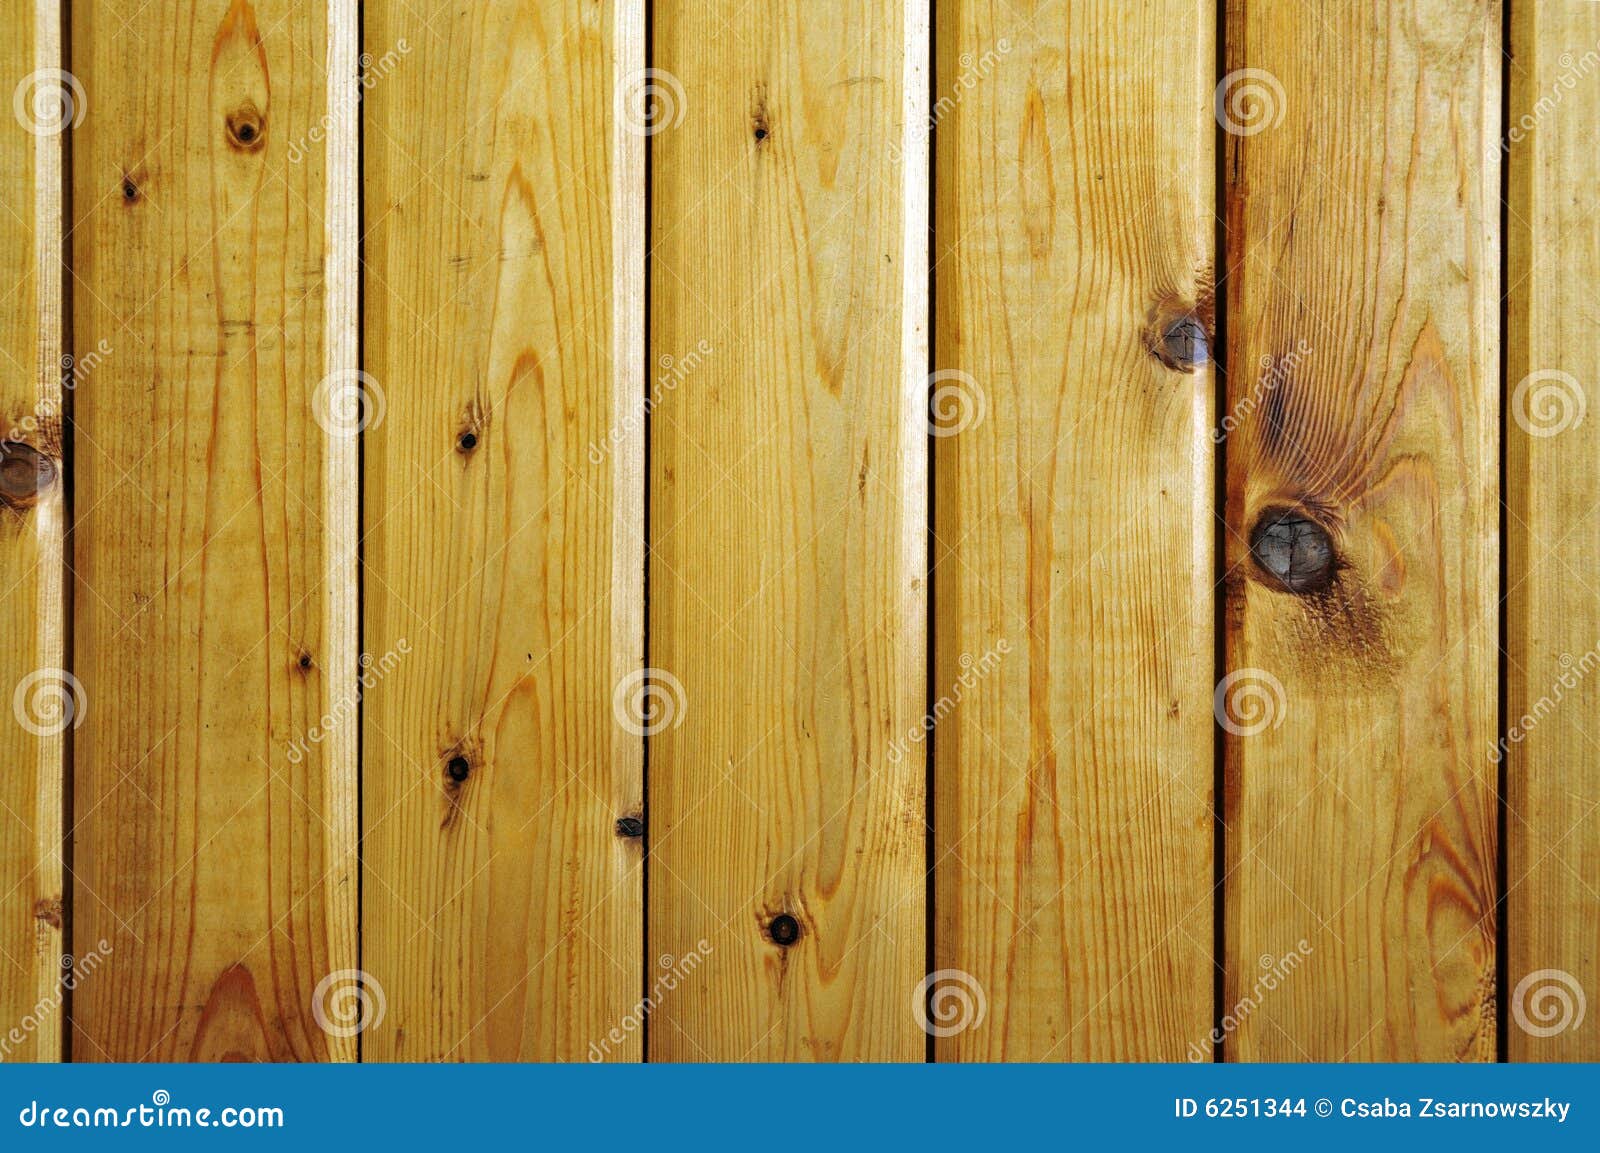 wooden panelling